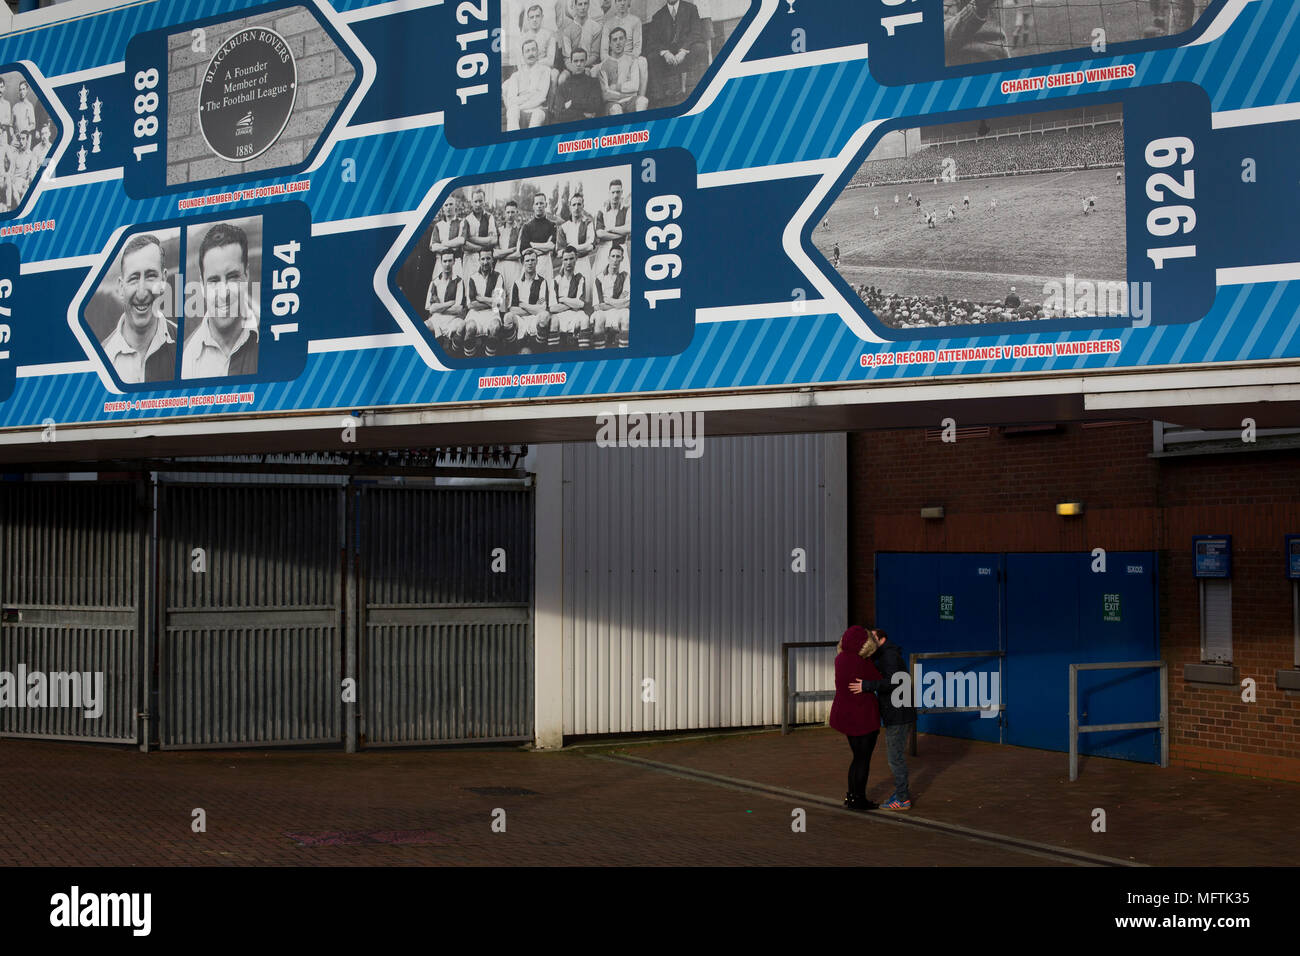 A couple kissing under a display dedicated to the home club's history before Blackburn Rovers played Shrewsbury Town in a Sky Bet League One fixture at Ewood Park. Both team were in the top three in the division at the start of the game. Blackburn won the match by 3 goals to 1, watched by a crowd of 13,579. Stock Photo